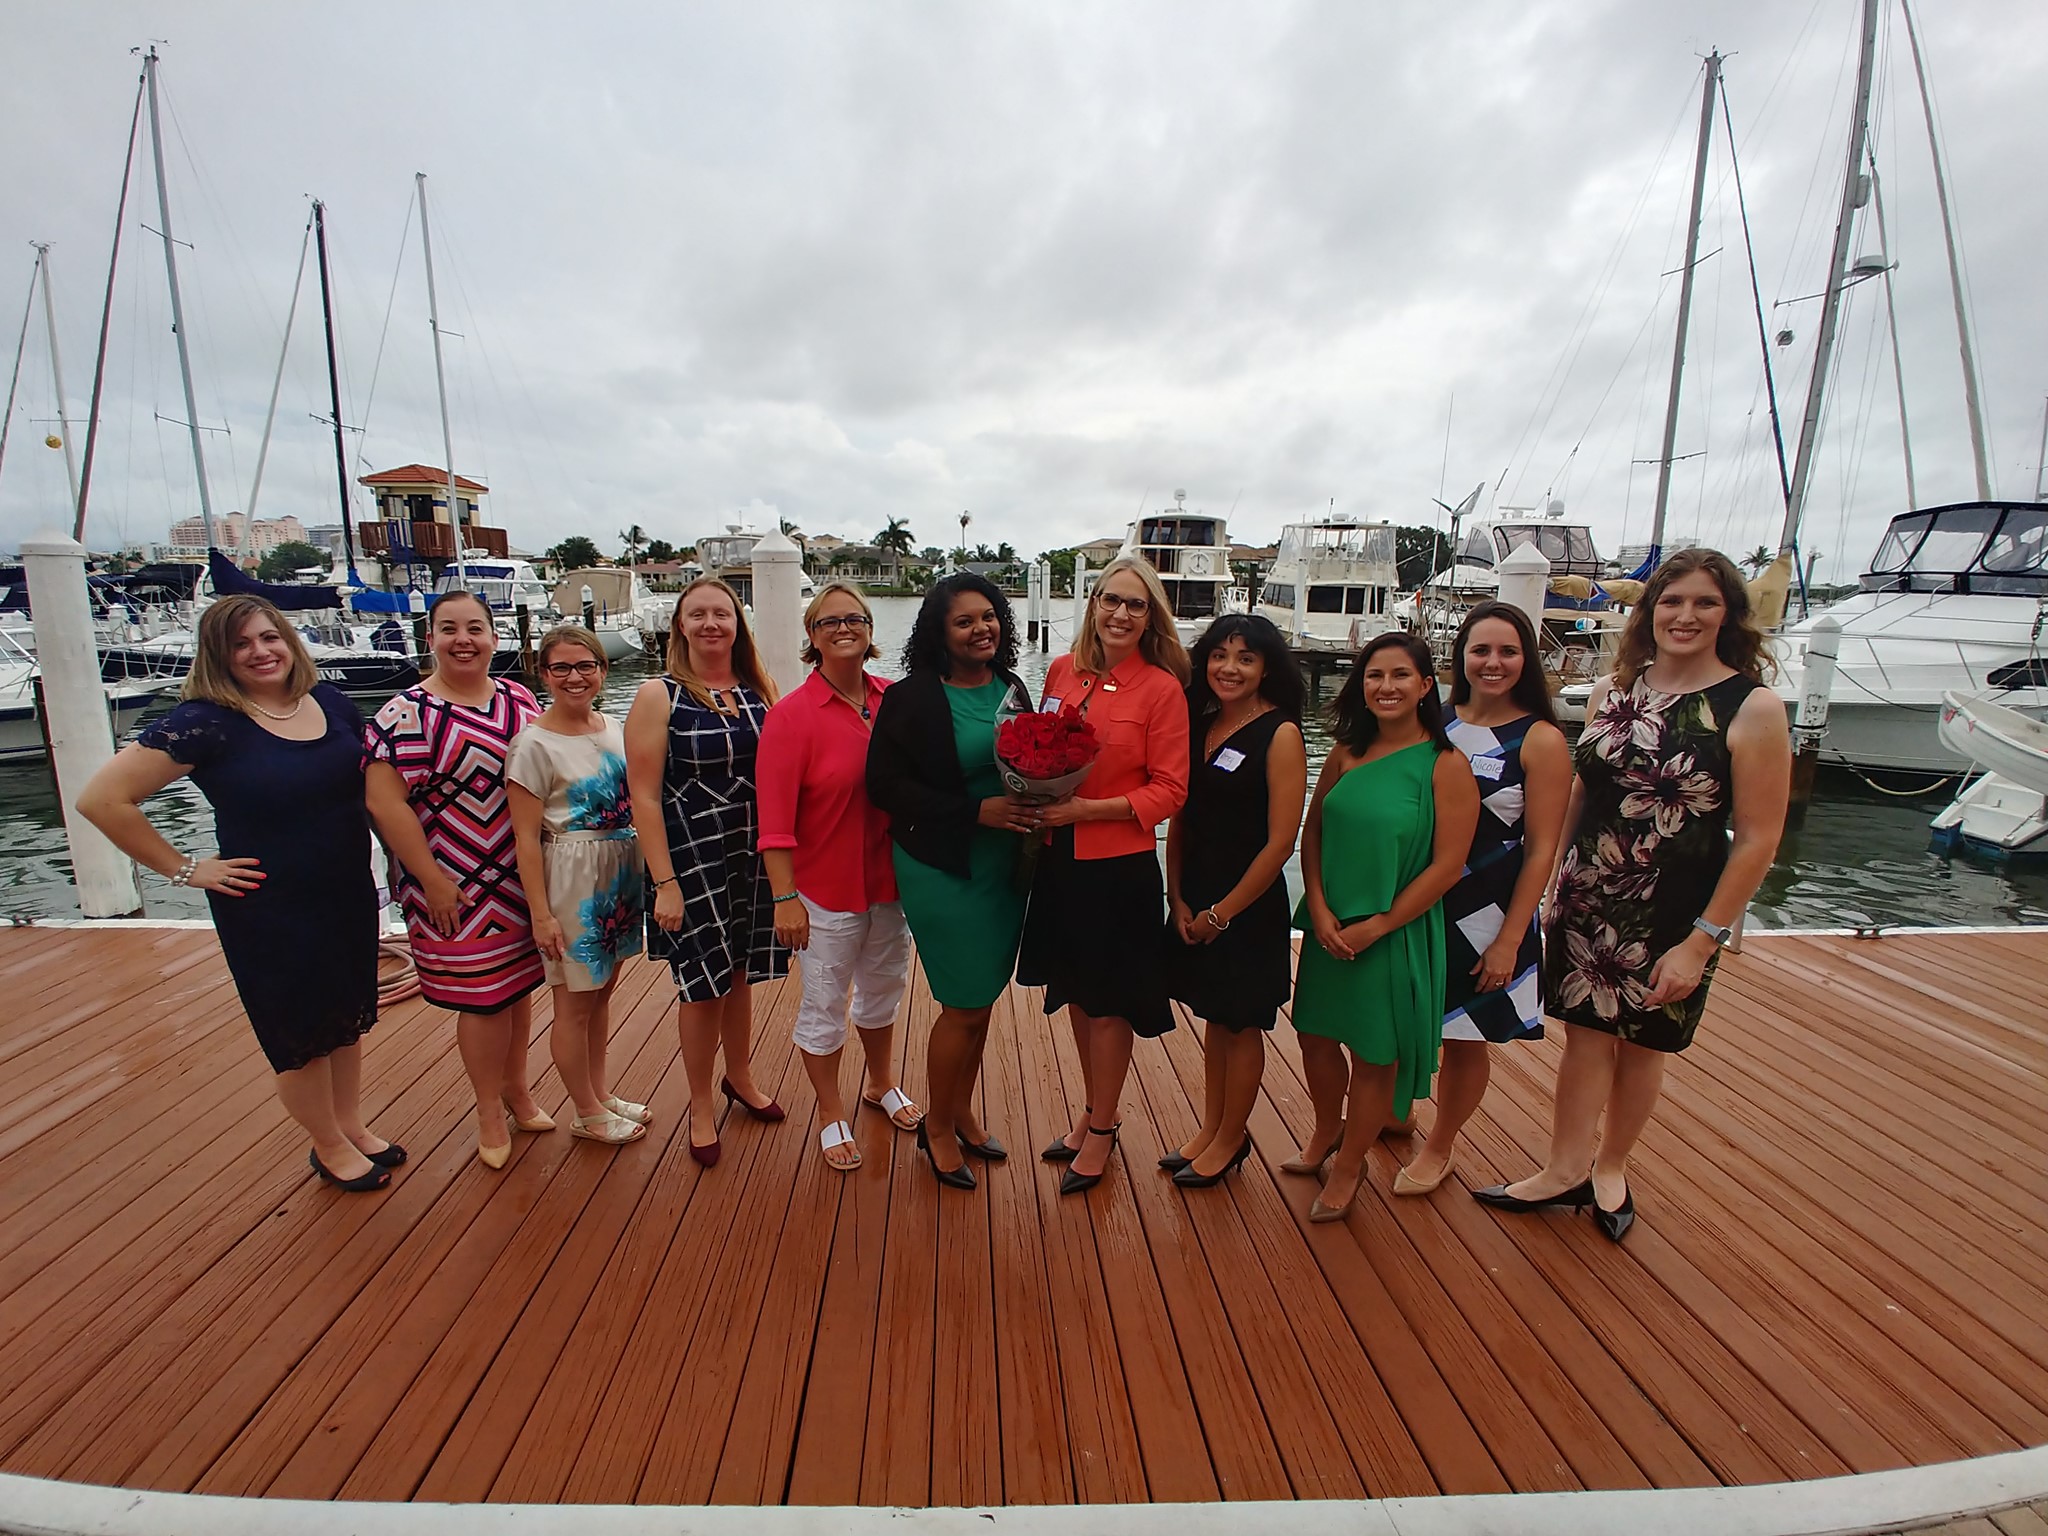 Florida Association for Women Lawyers members group photo